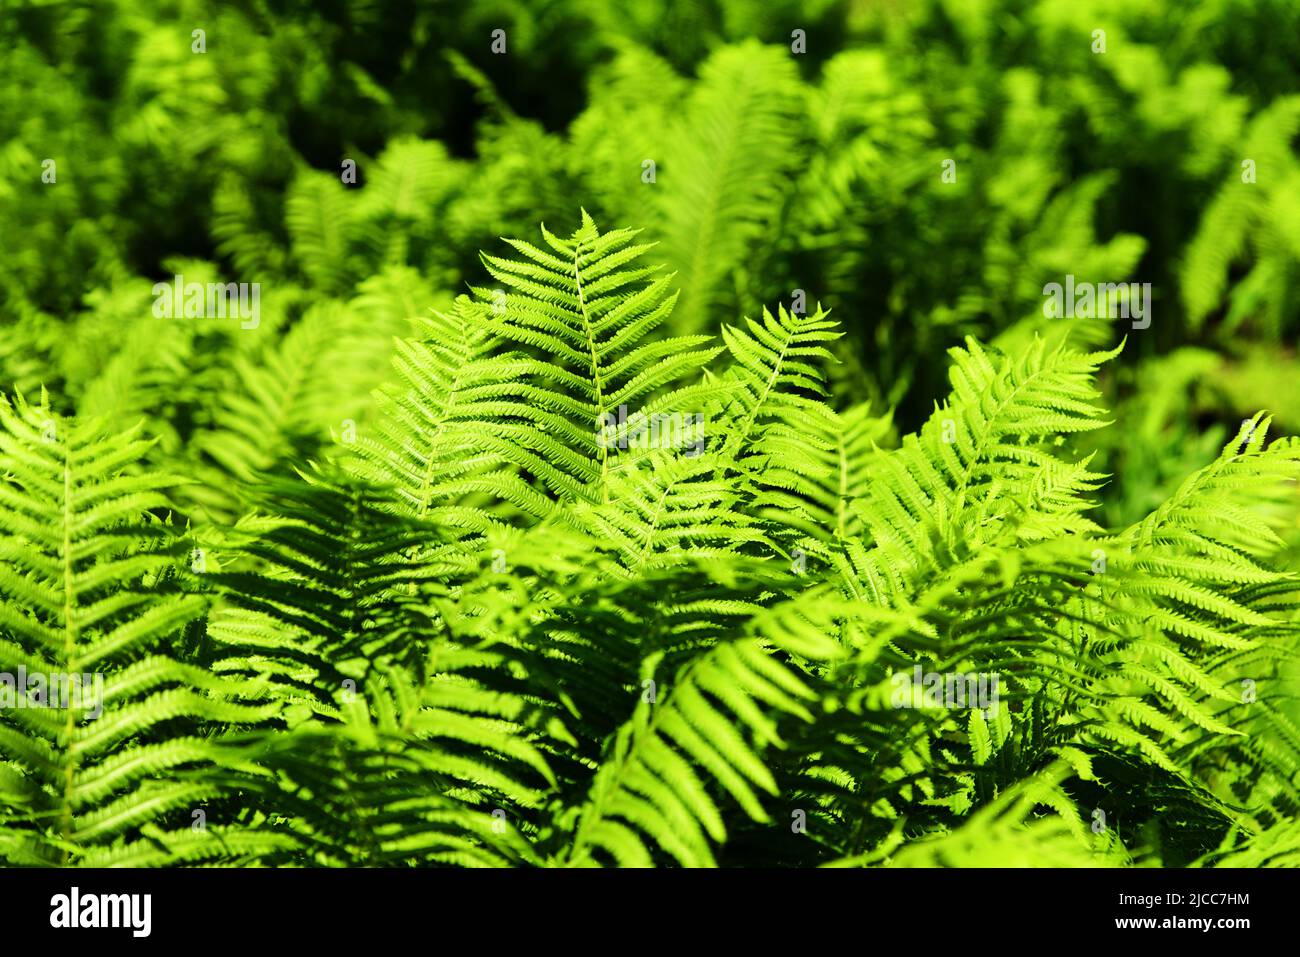 Fern background. Green lush foliage of ferns on sunny day. Natural bright botanical texture. Selective focus Stock Photo